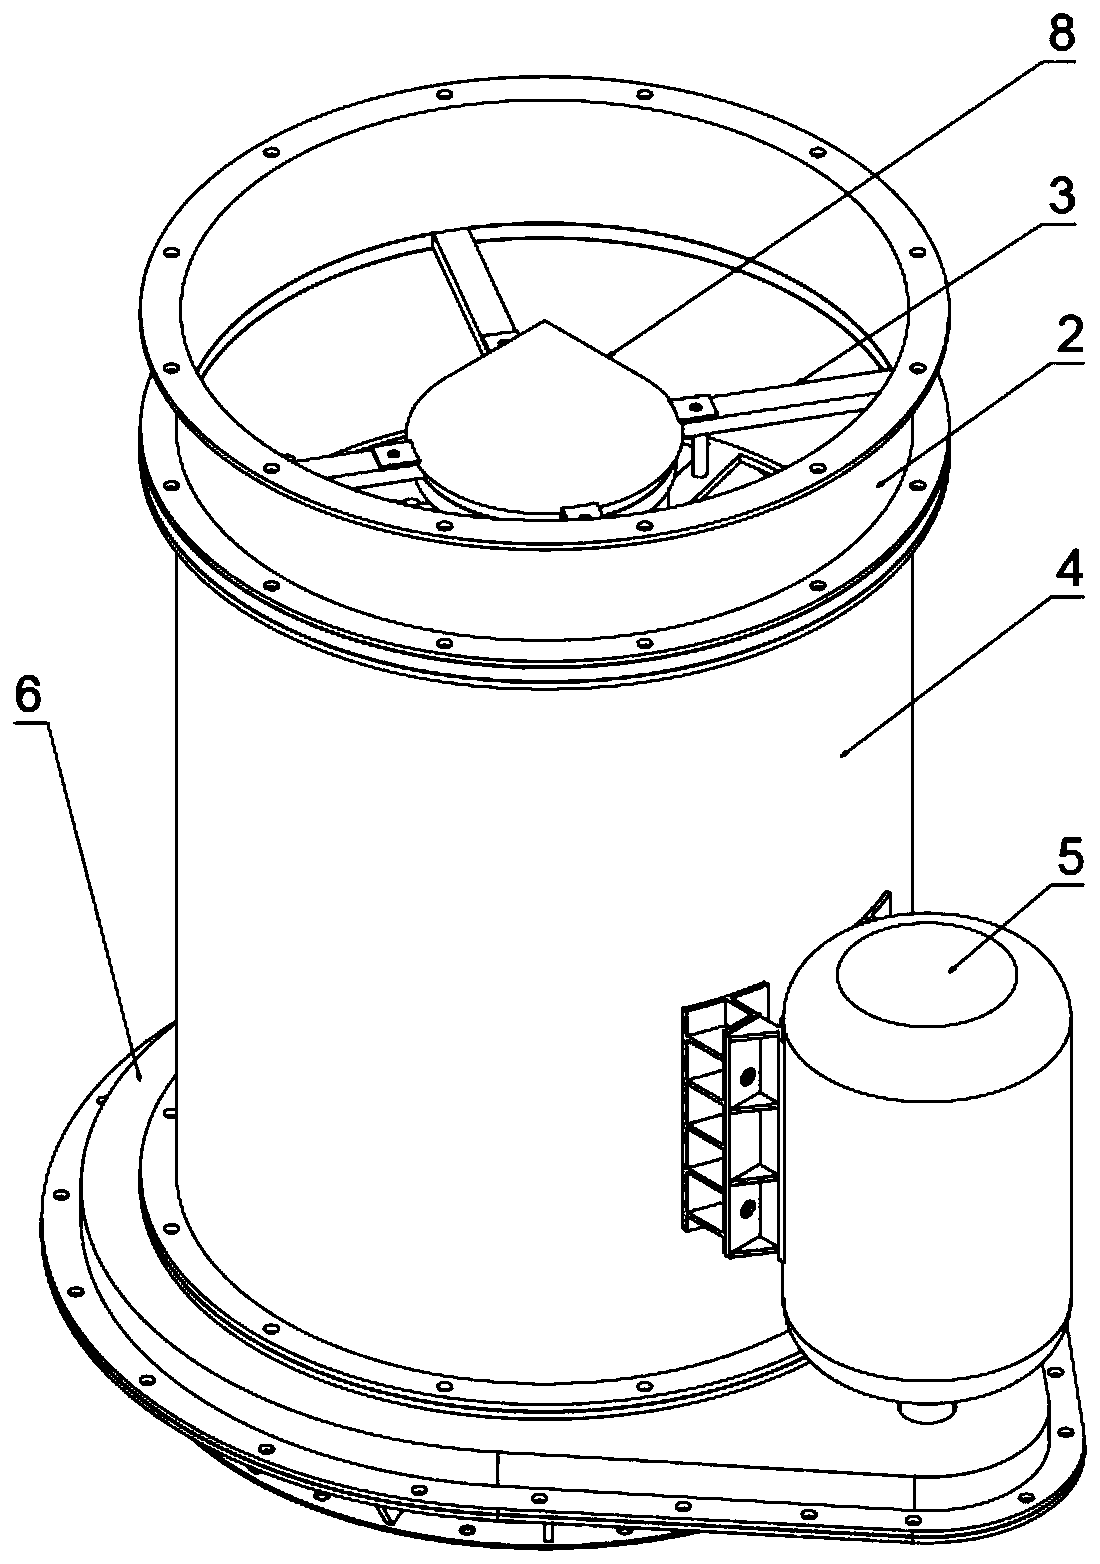 Device for stably and continuously discharging solid bulk material